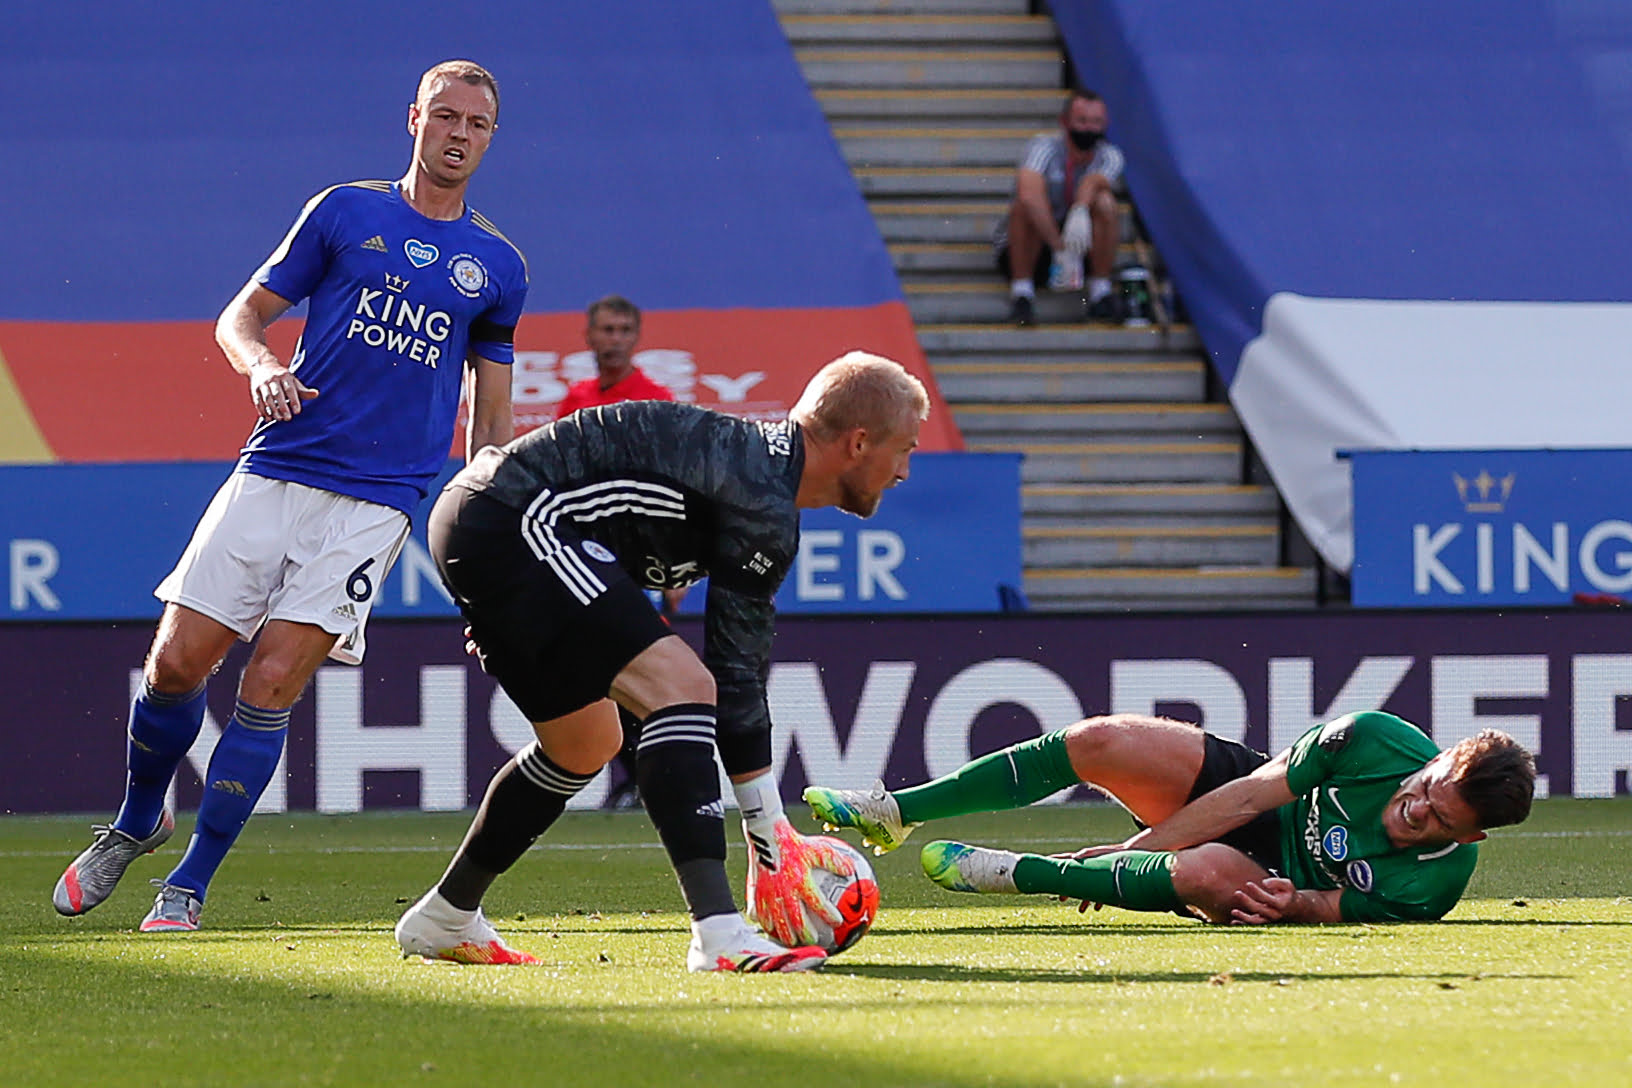 Manchester United eyeing a summer move for Kasper Schmeichel who is in action in the photo